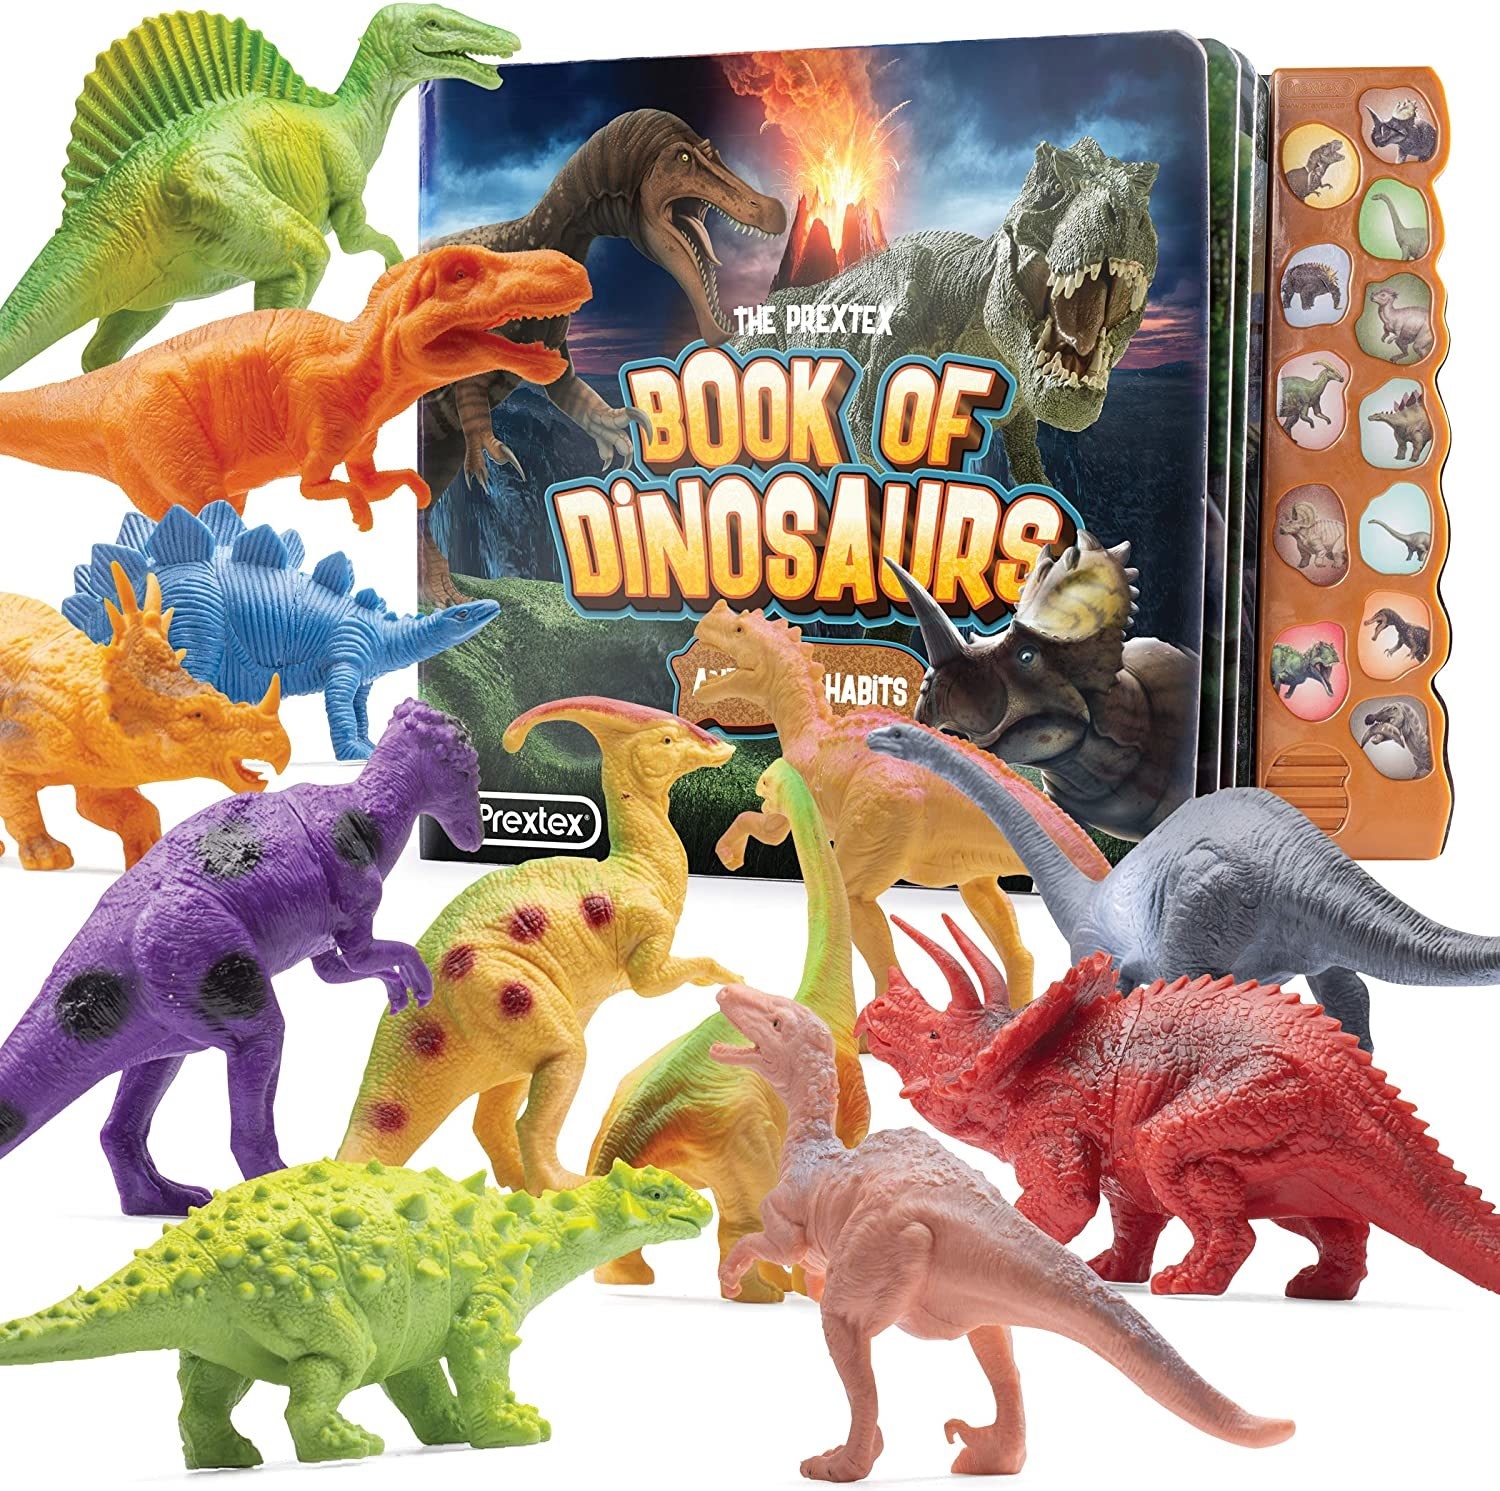 12 colorful dinosaur figures with a book